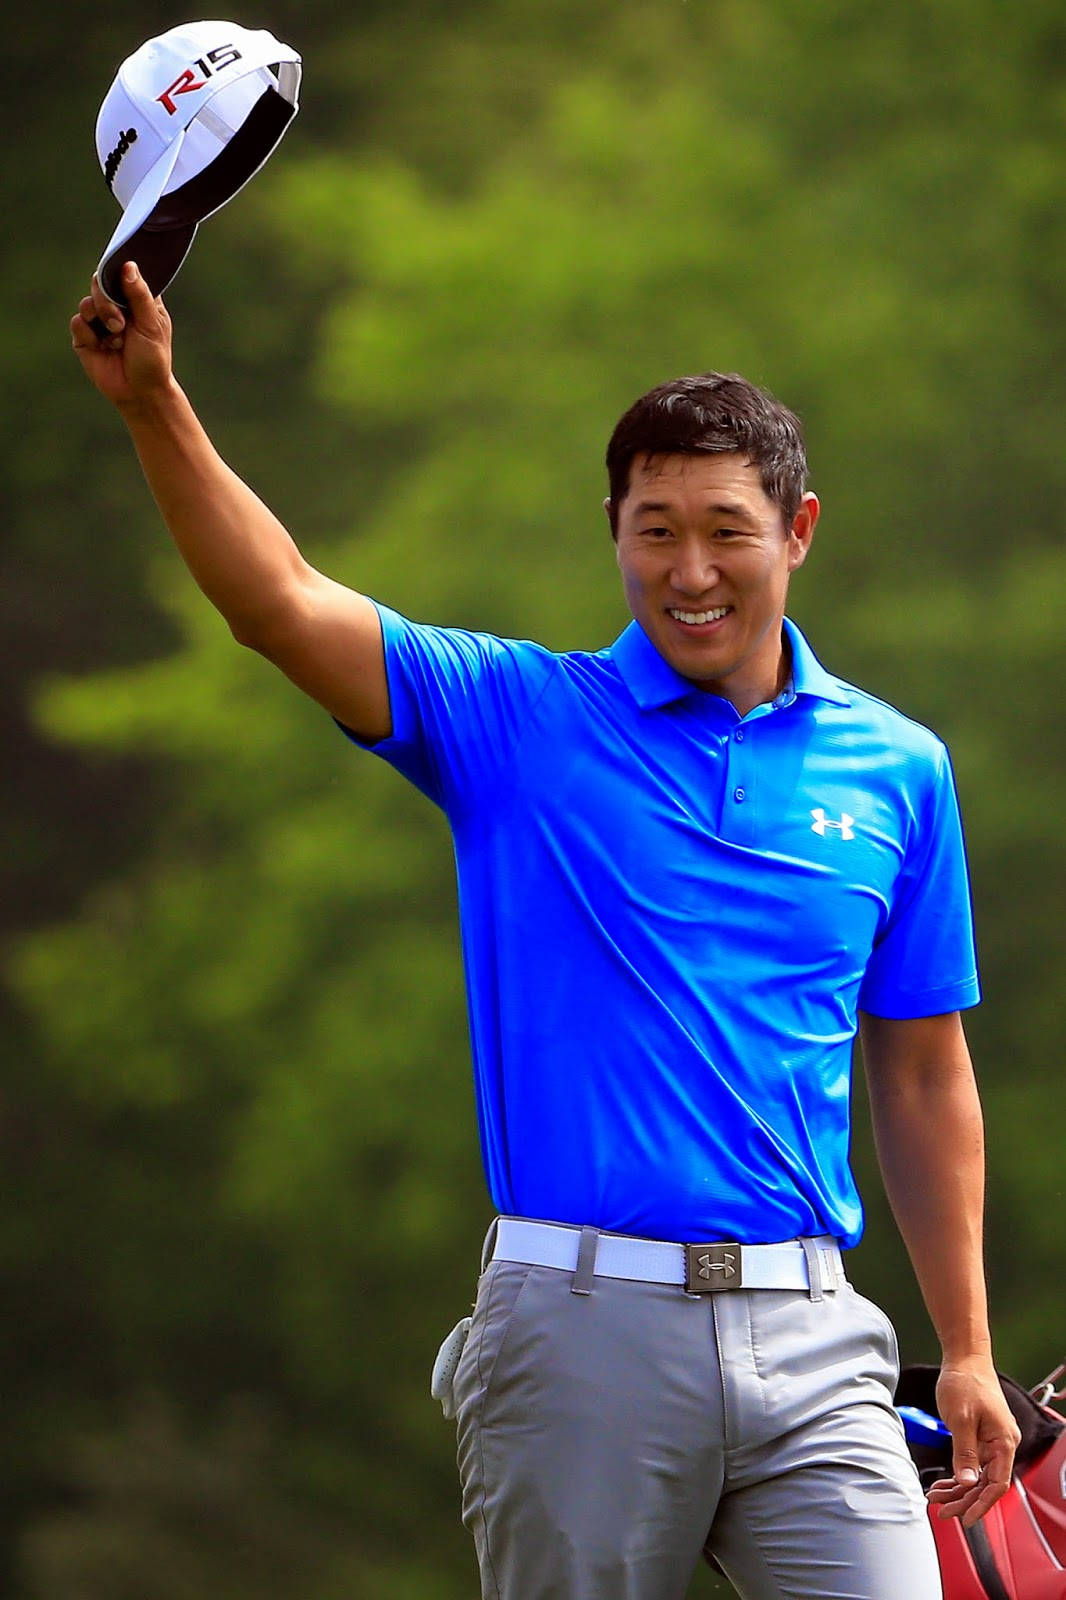 Professional golfer James Hahn smiling and holding his golf cap. Wallpaper